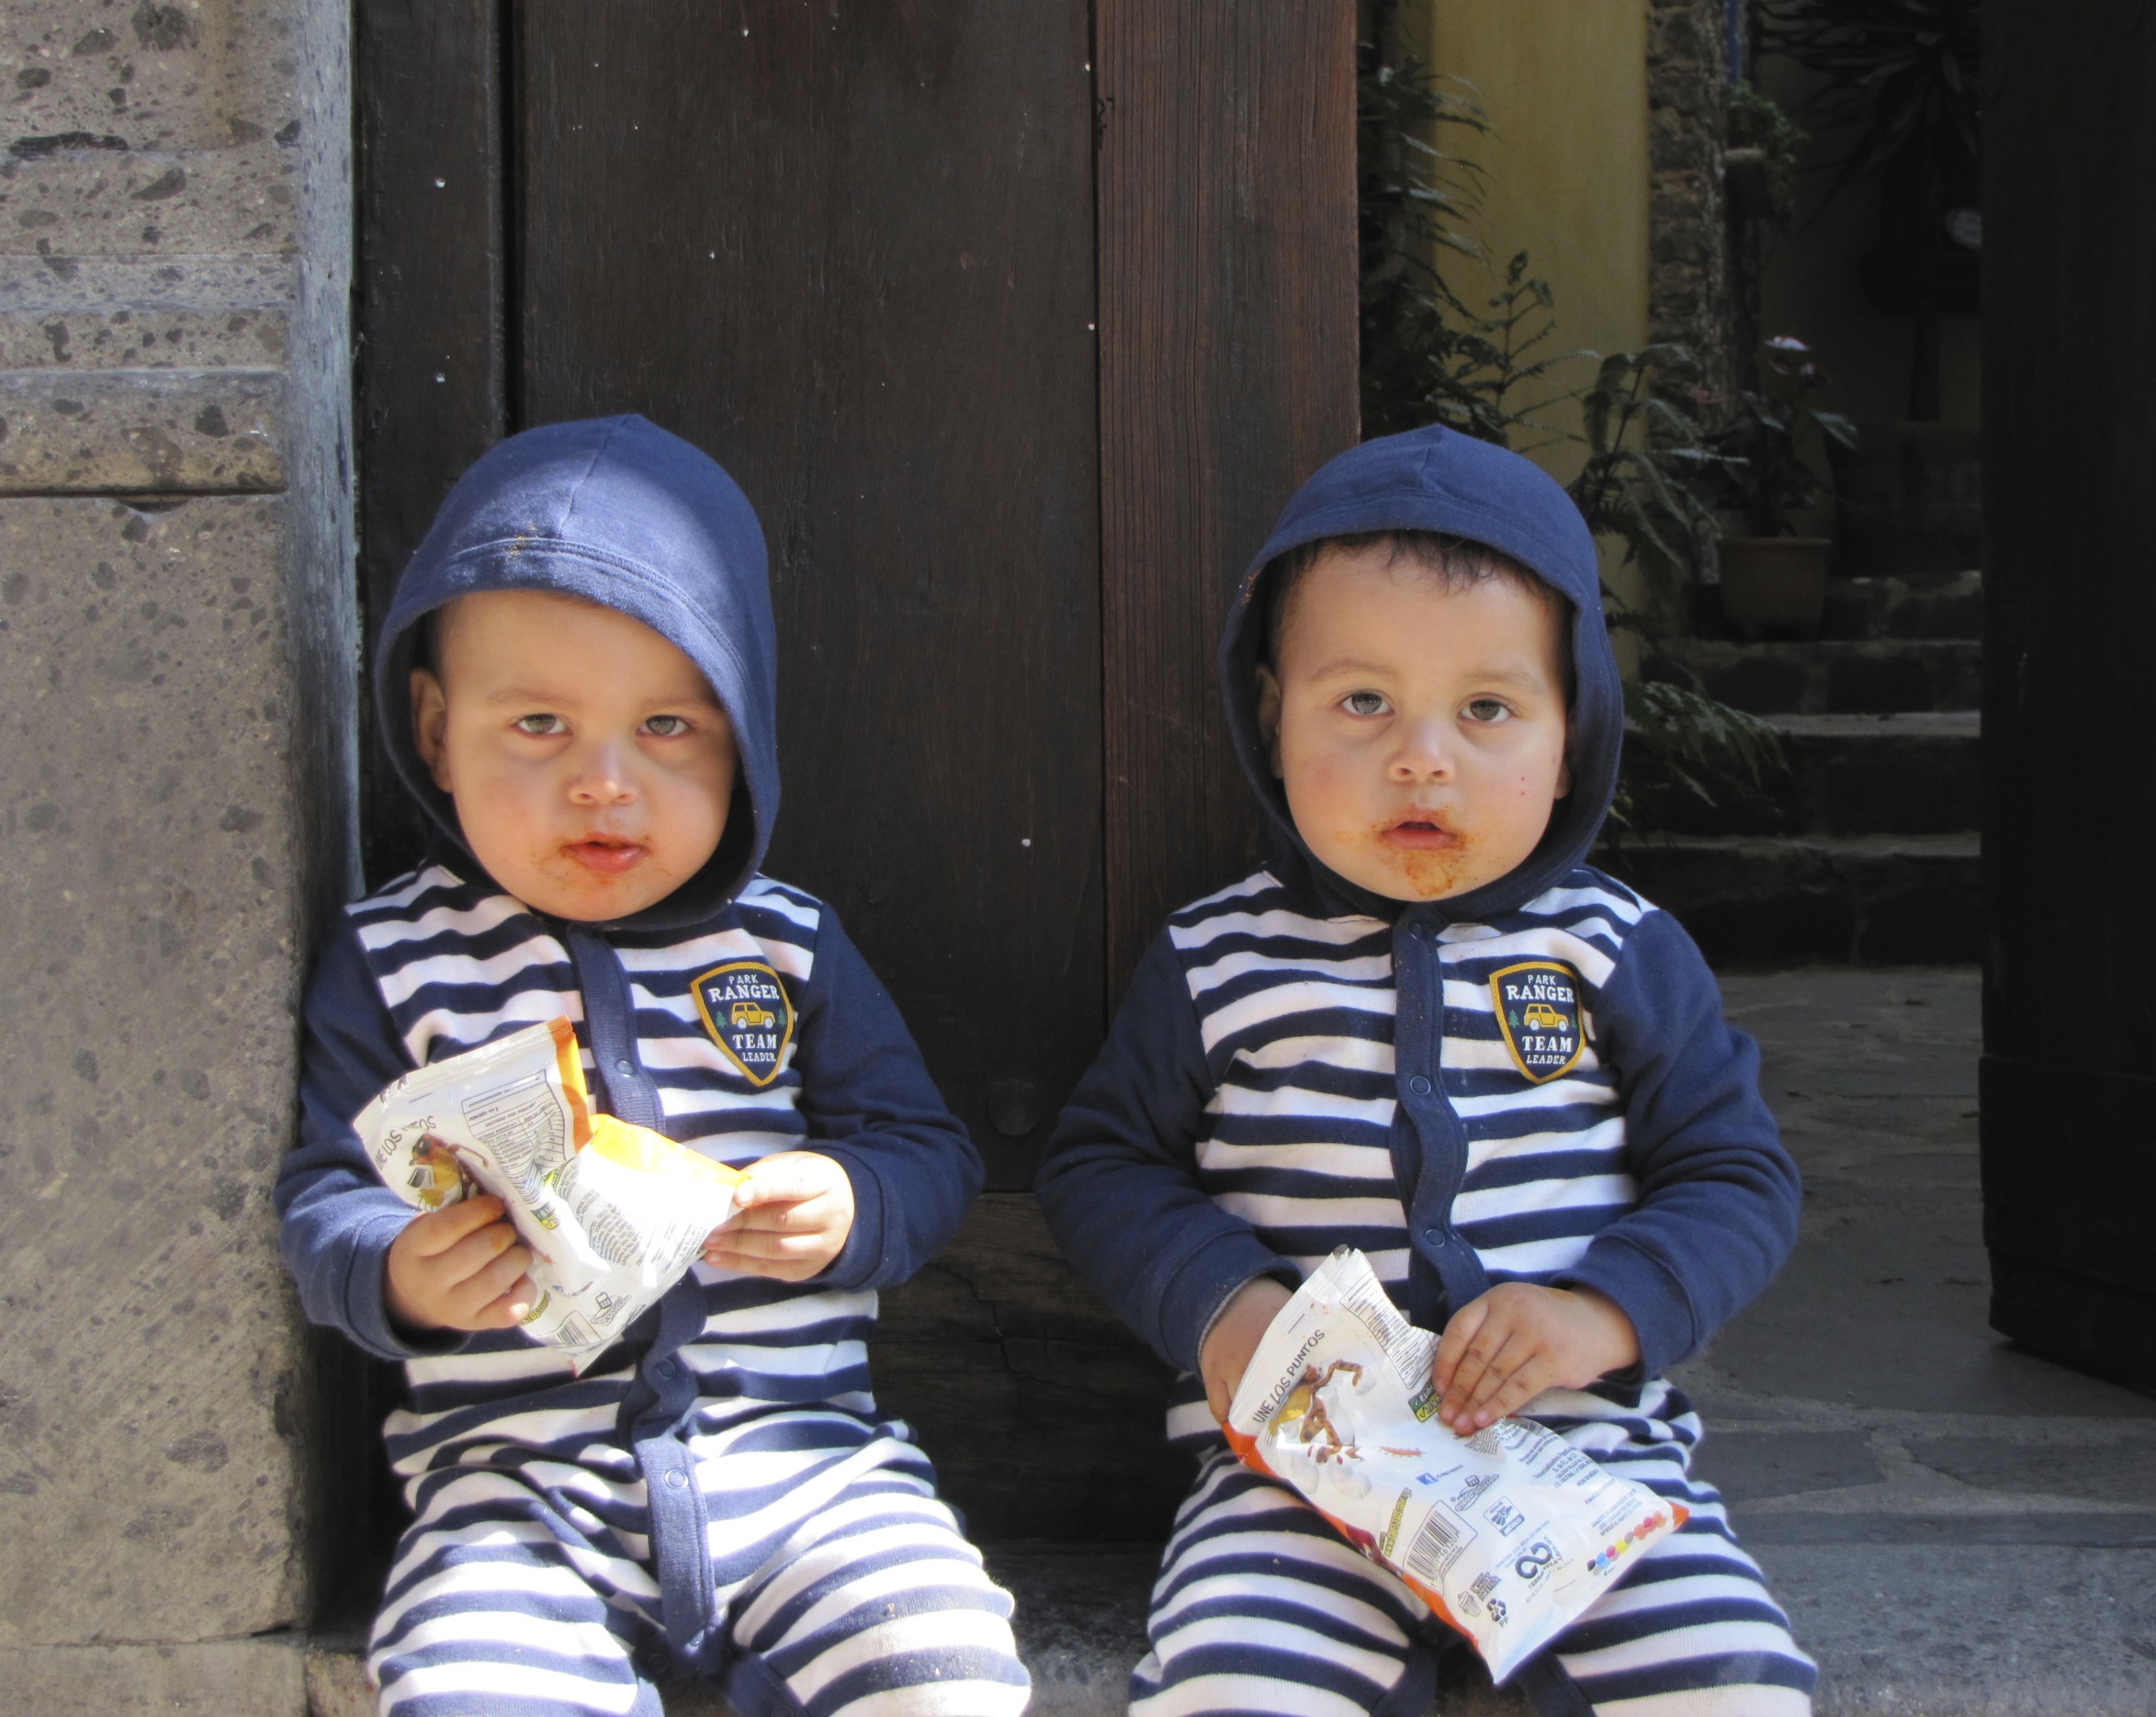 Twins outside our door! So cute even though the chips were, well... - Version 2.JPG